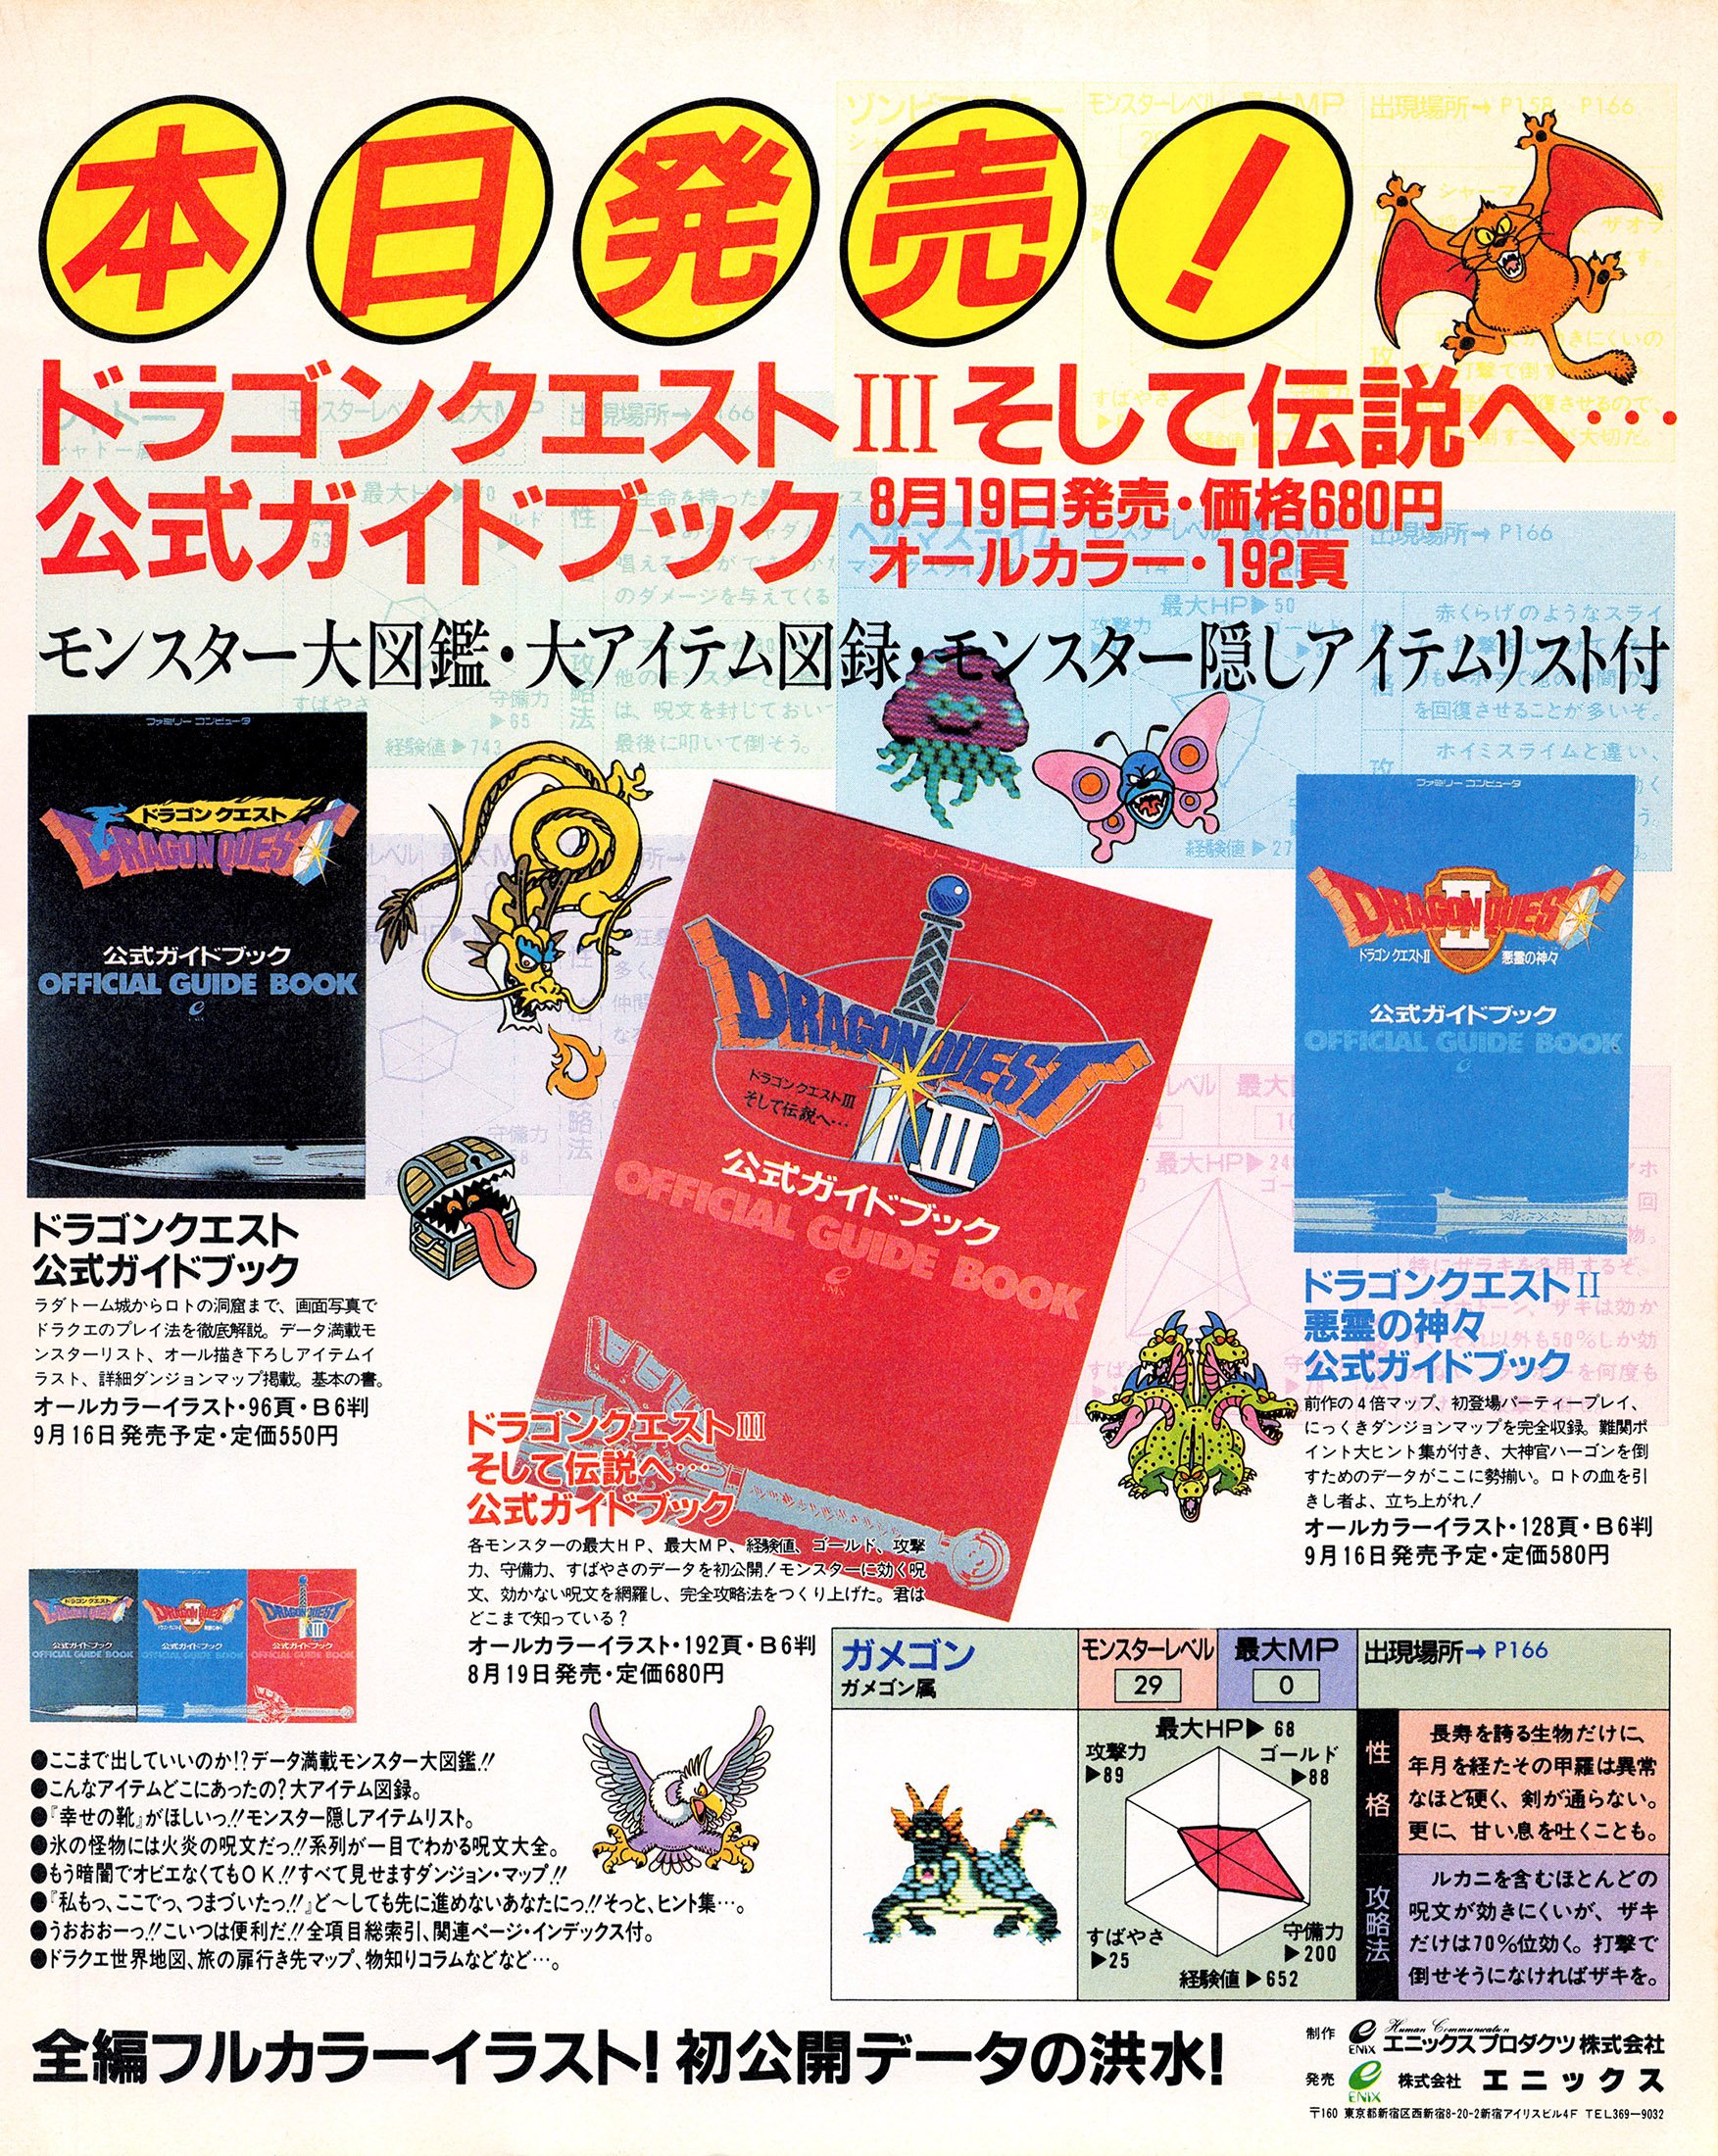 Dragon Quest I-II-III Official Guide Books (Japan)